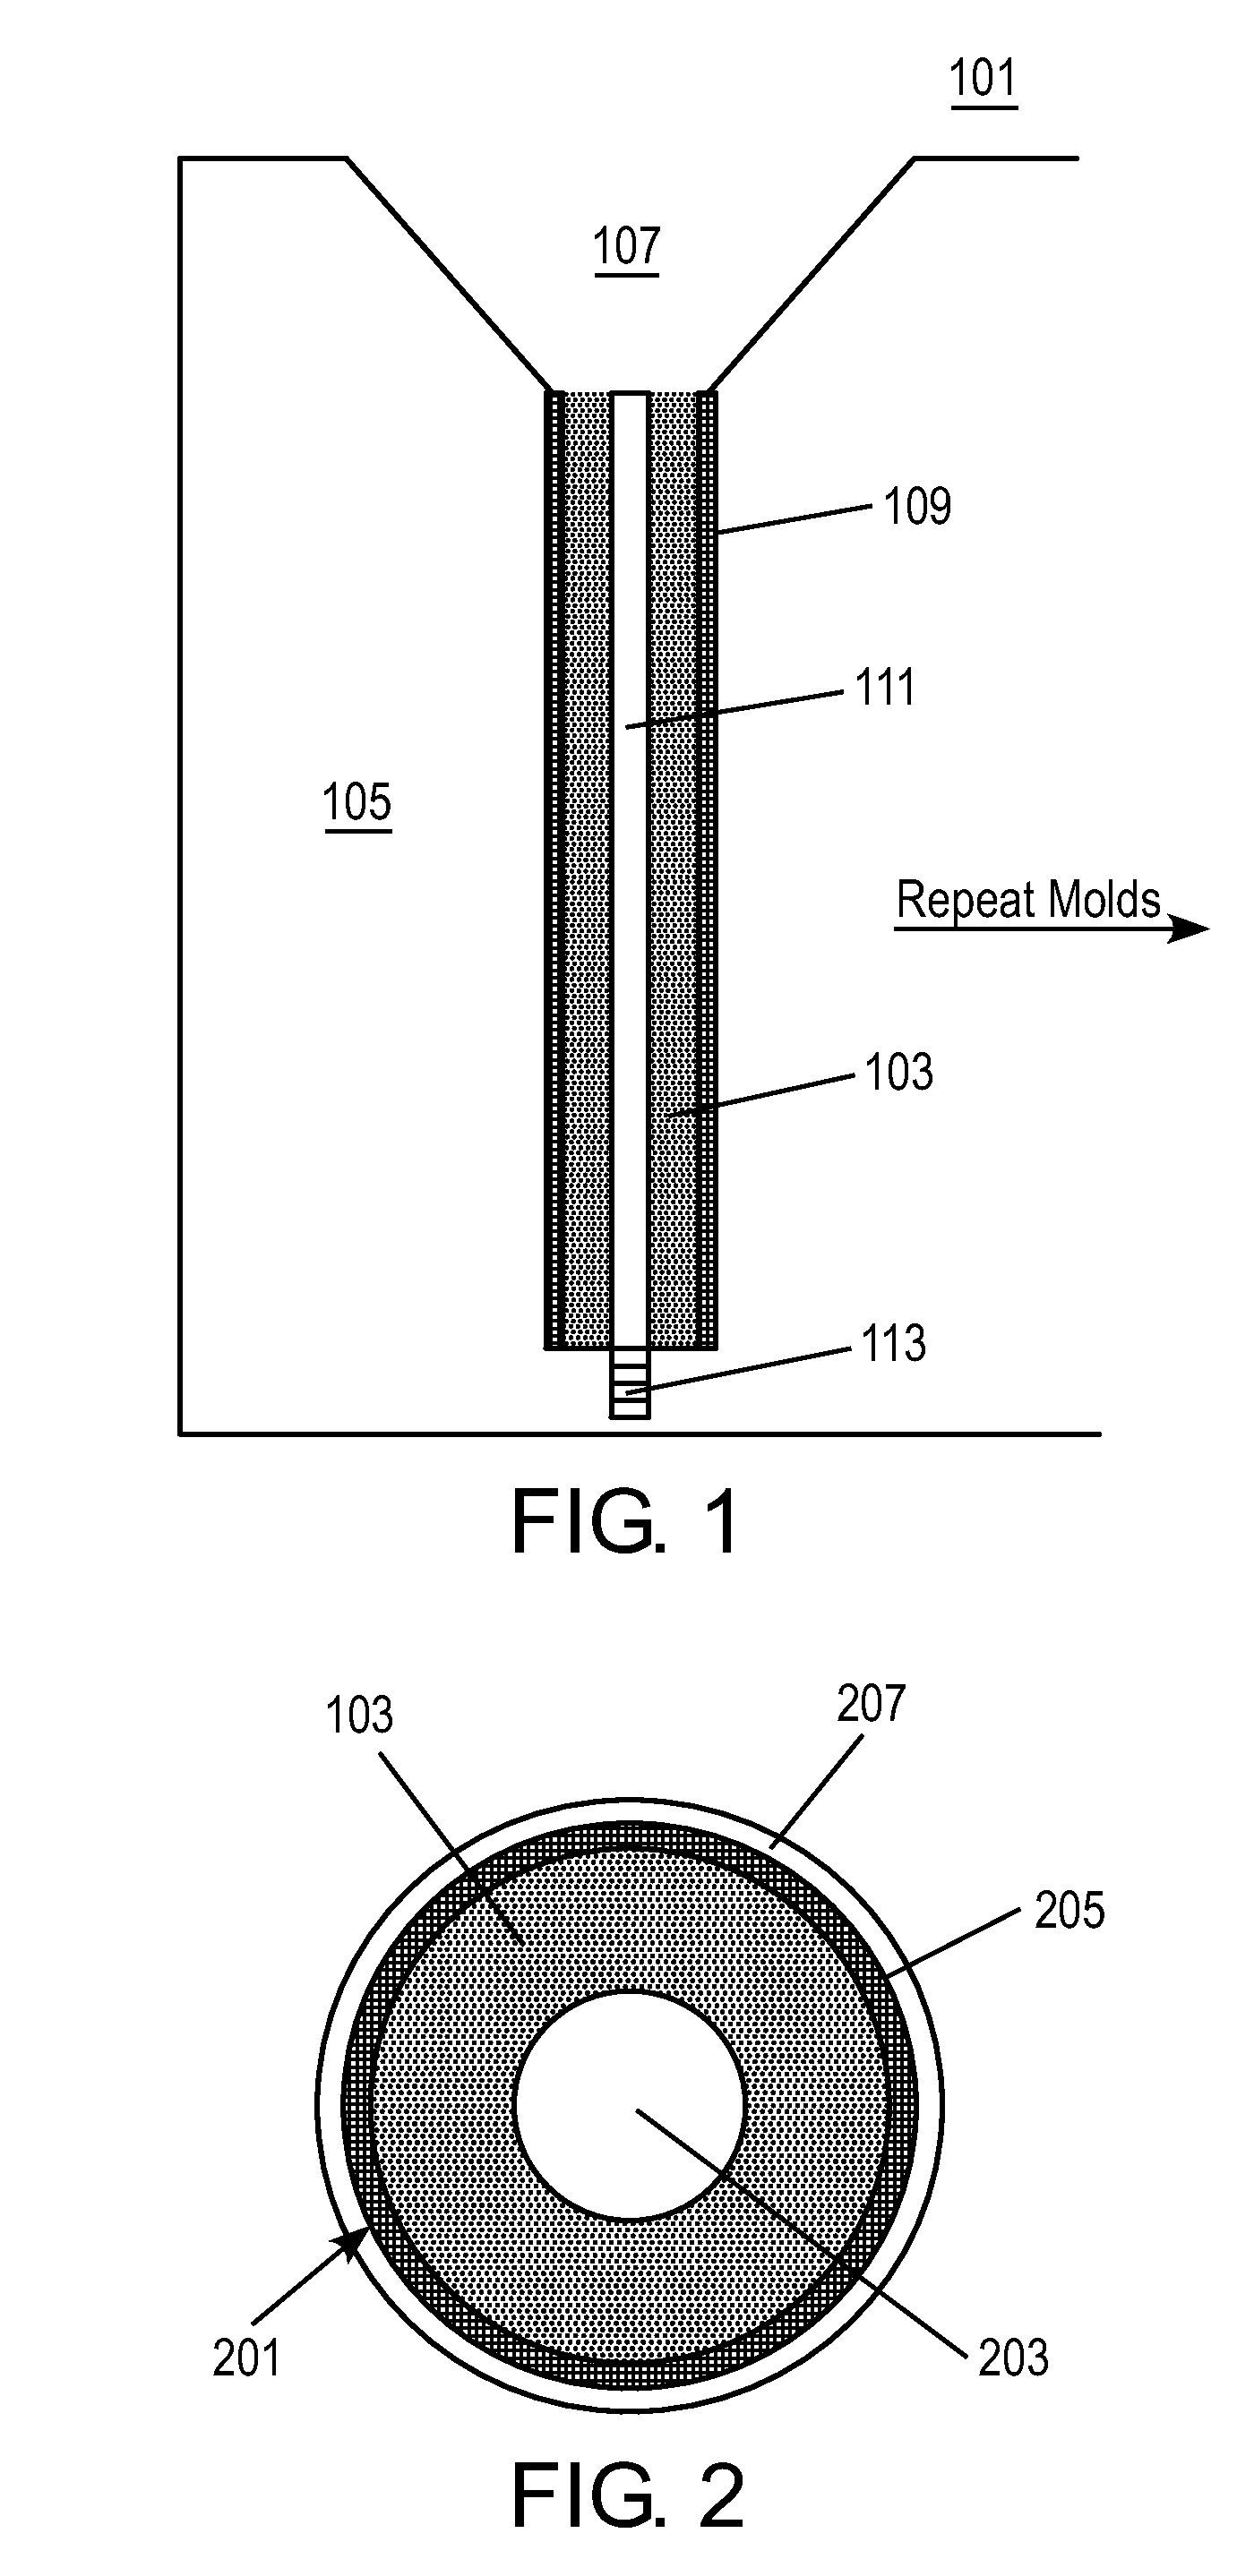 Sheathed, annular metal nuclear fuel